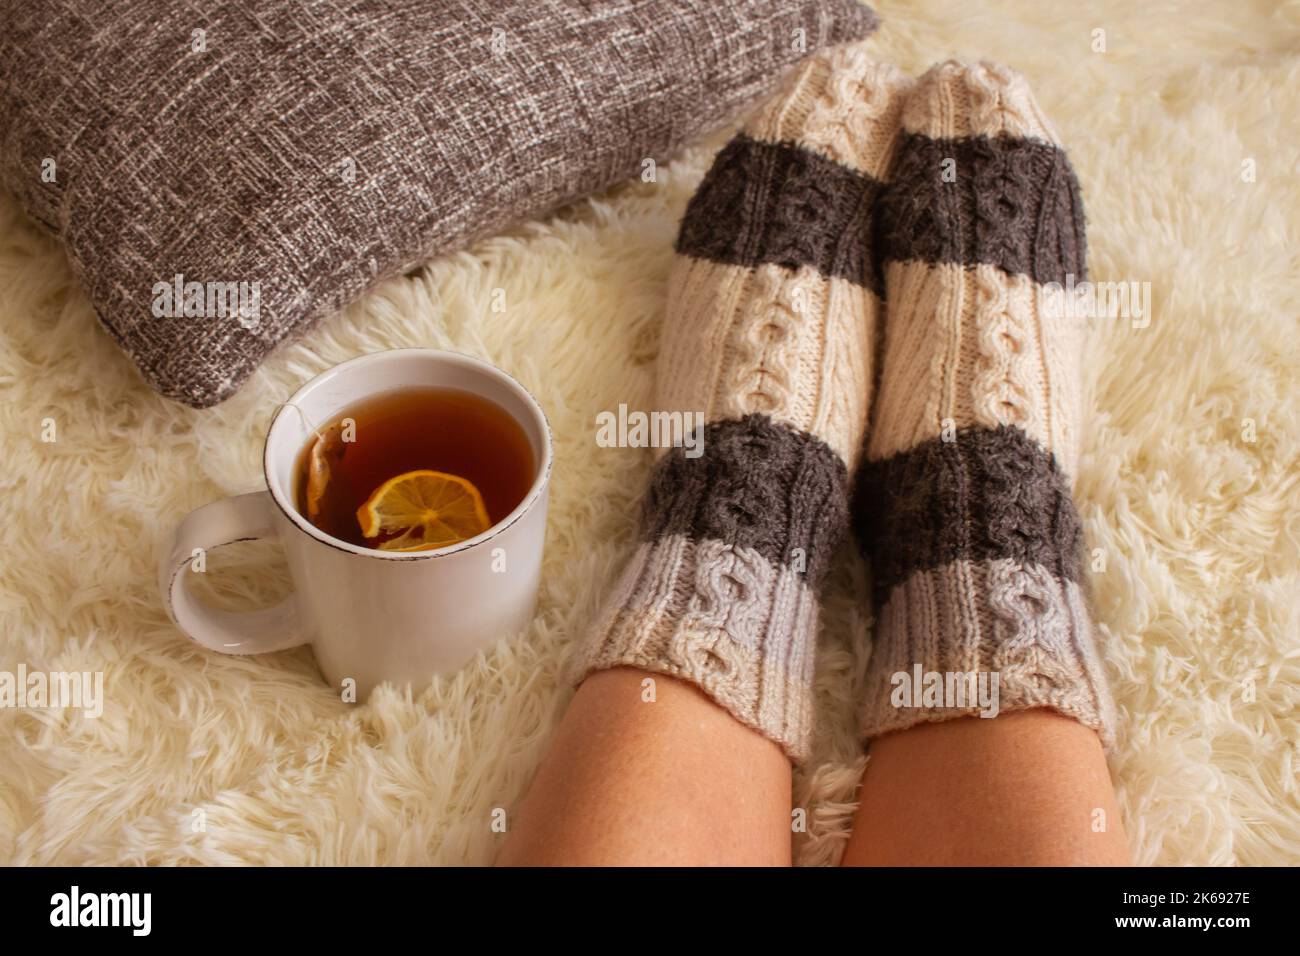 Girl in warm woolen socks with teacup, top view. Woman on white carpet with cup of tea with lemon. Cozy home interior. Winter holidays. Home comfort. Stock Photo